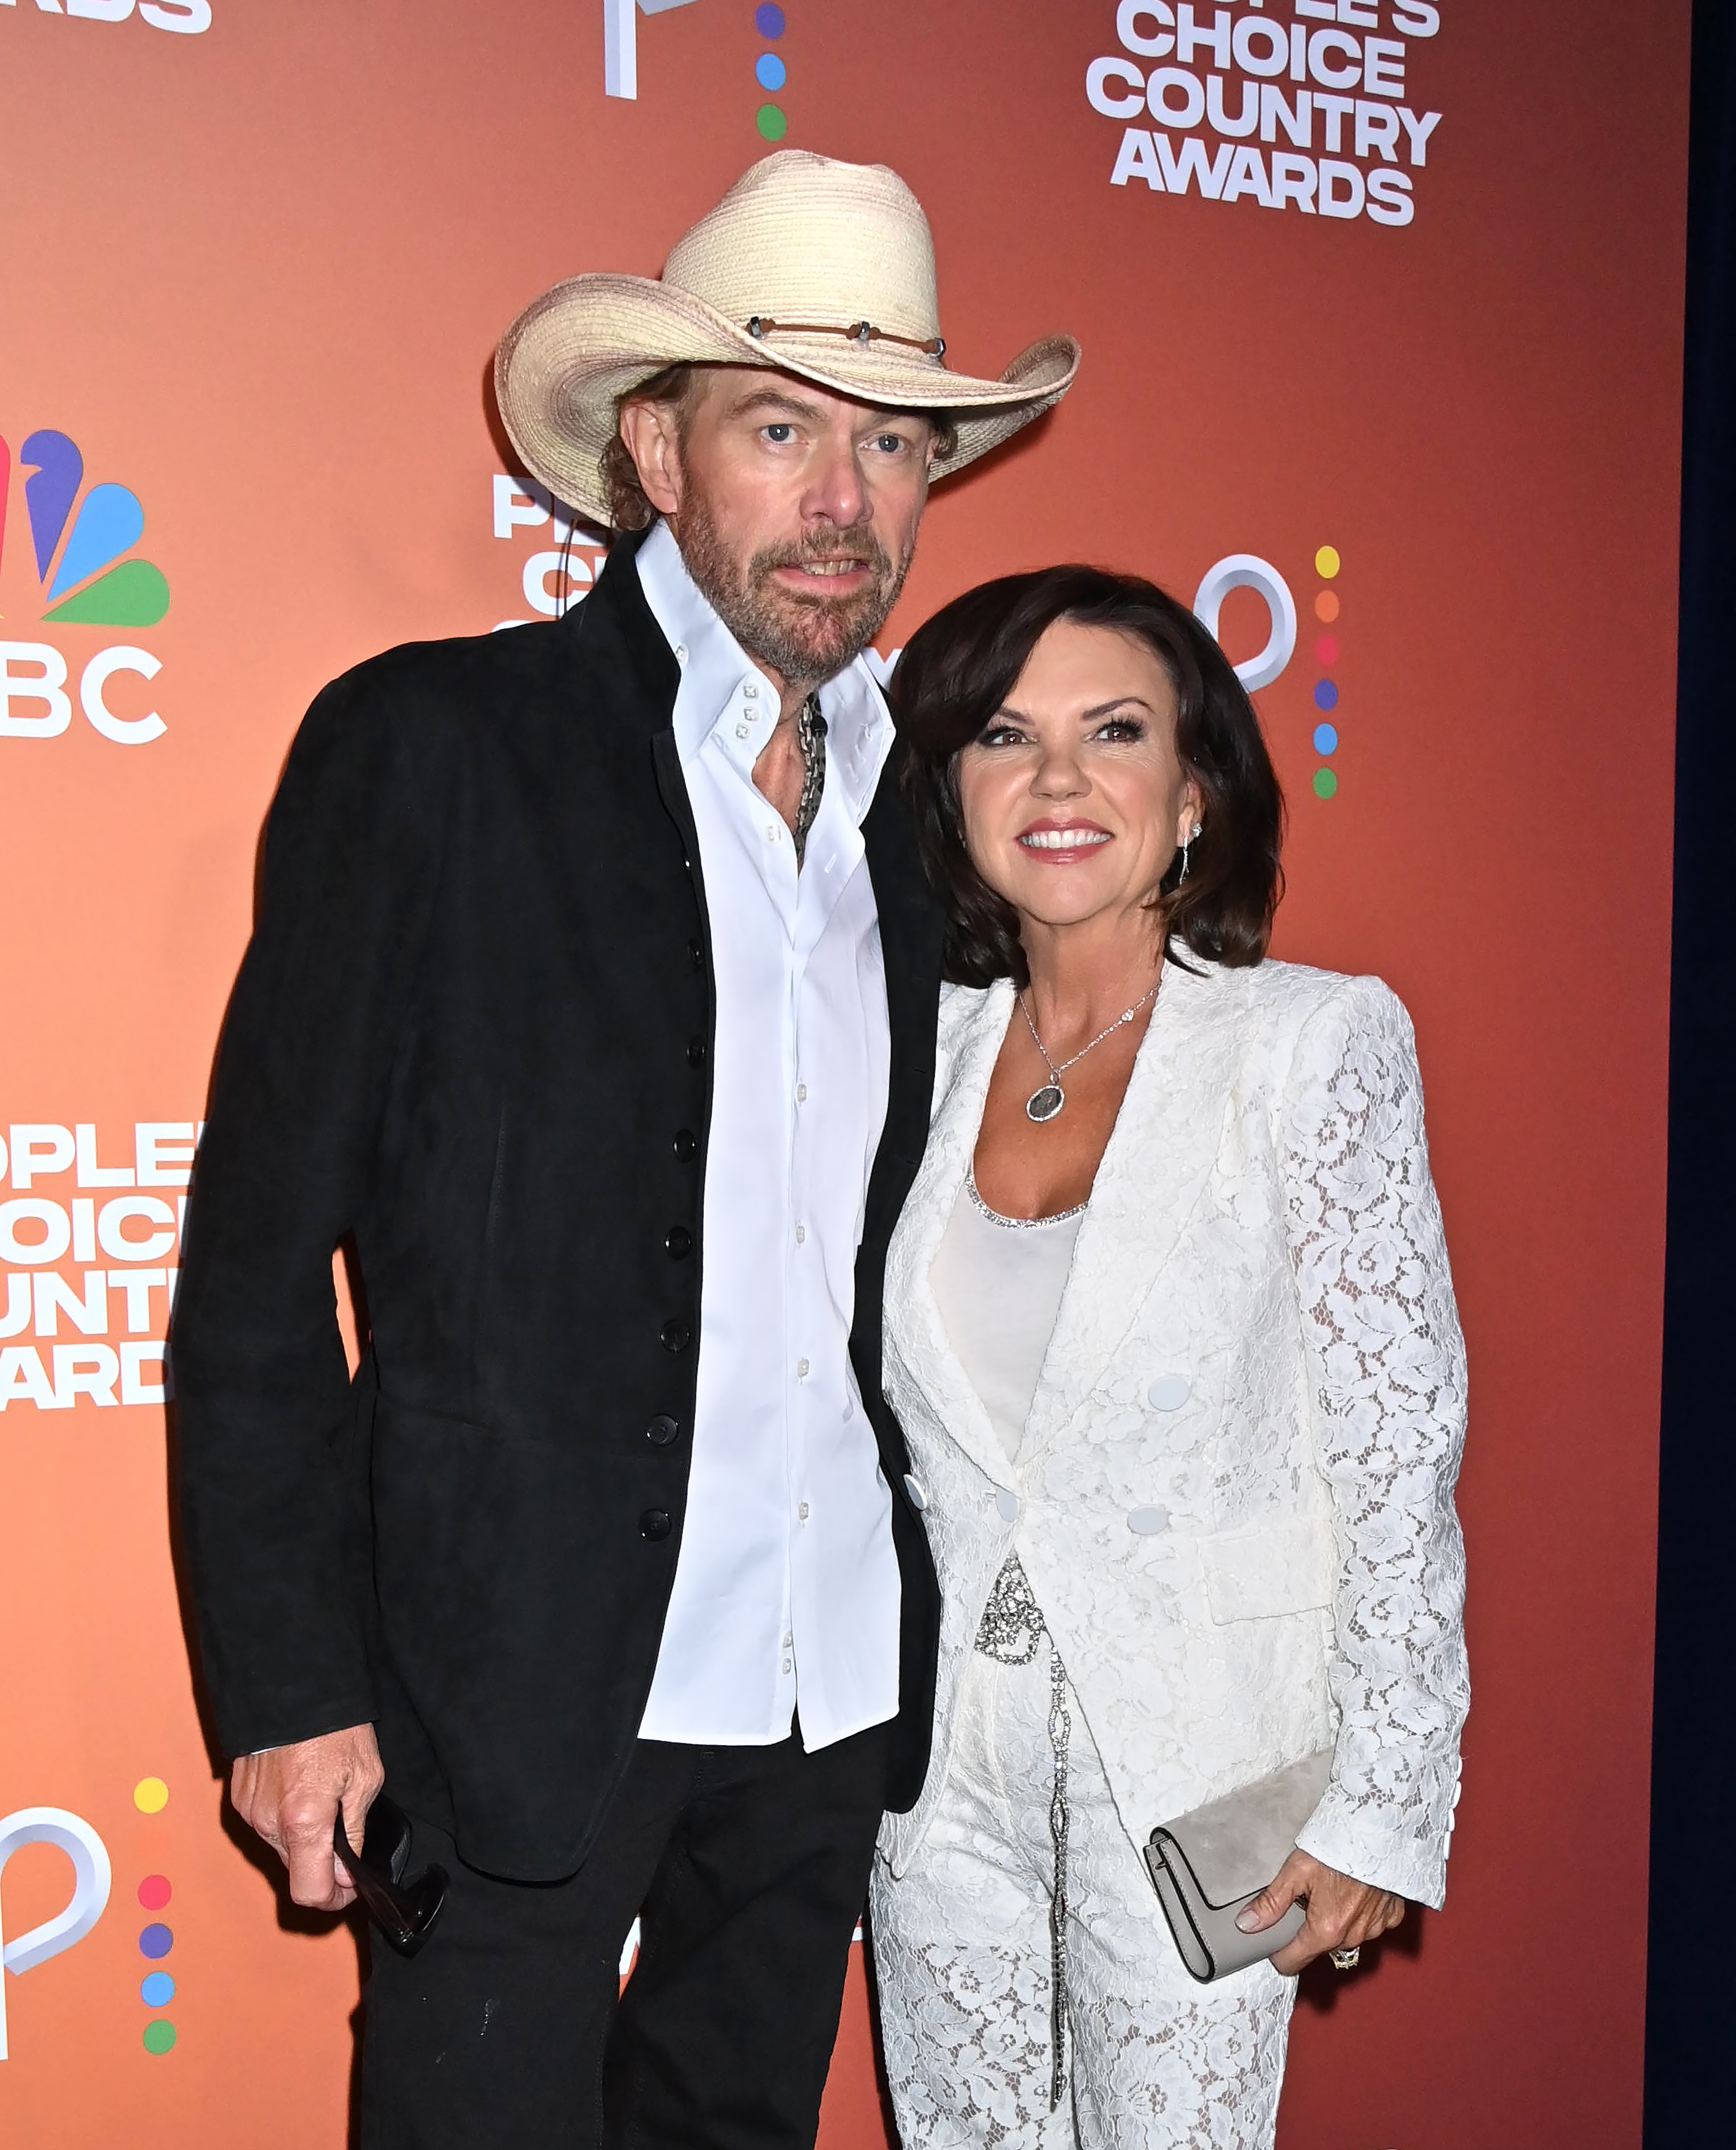 Toby Keith and his wife Trisha at the 2023 People's Choice Country Awards on September 28, 2023 in Nashville, Tennessee | Source: Getty Images